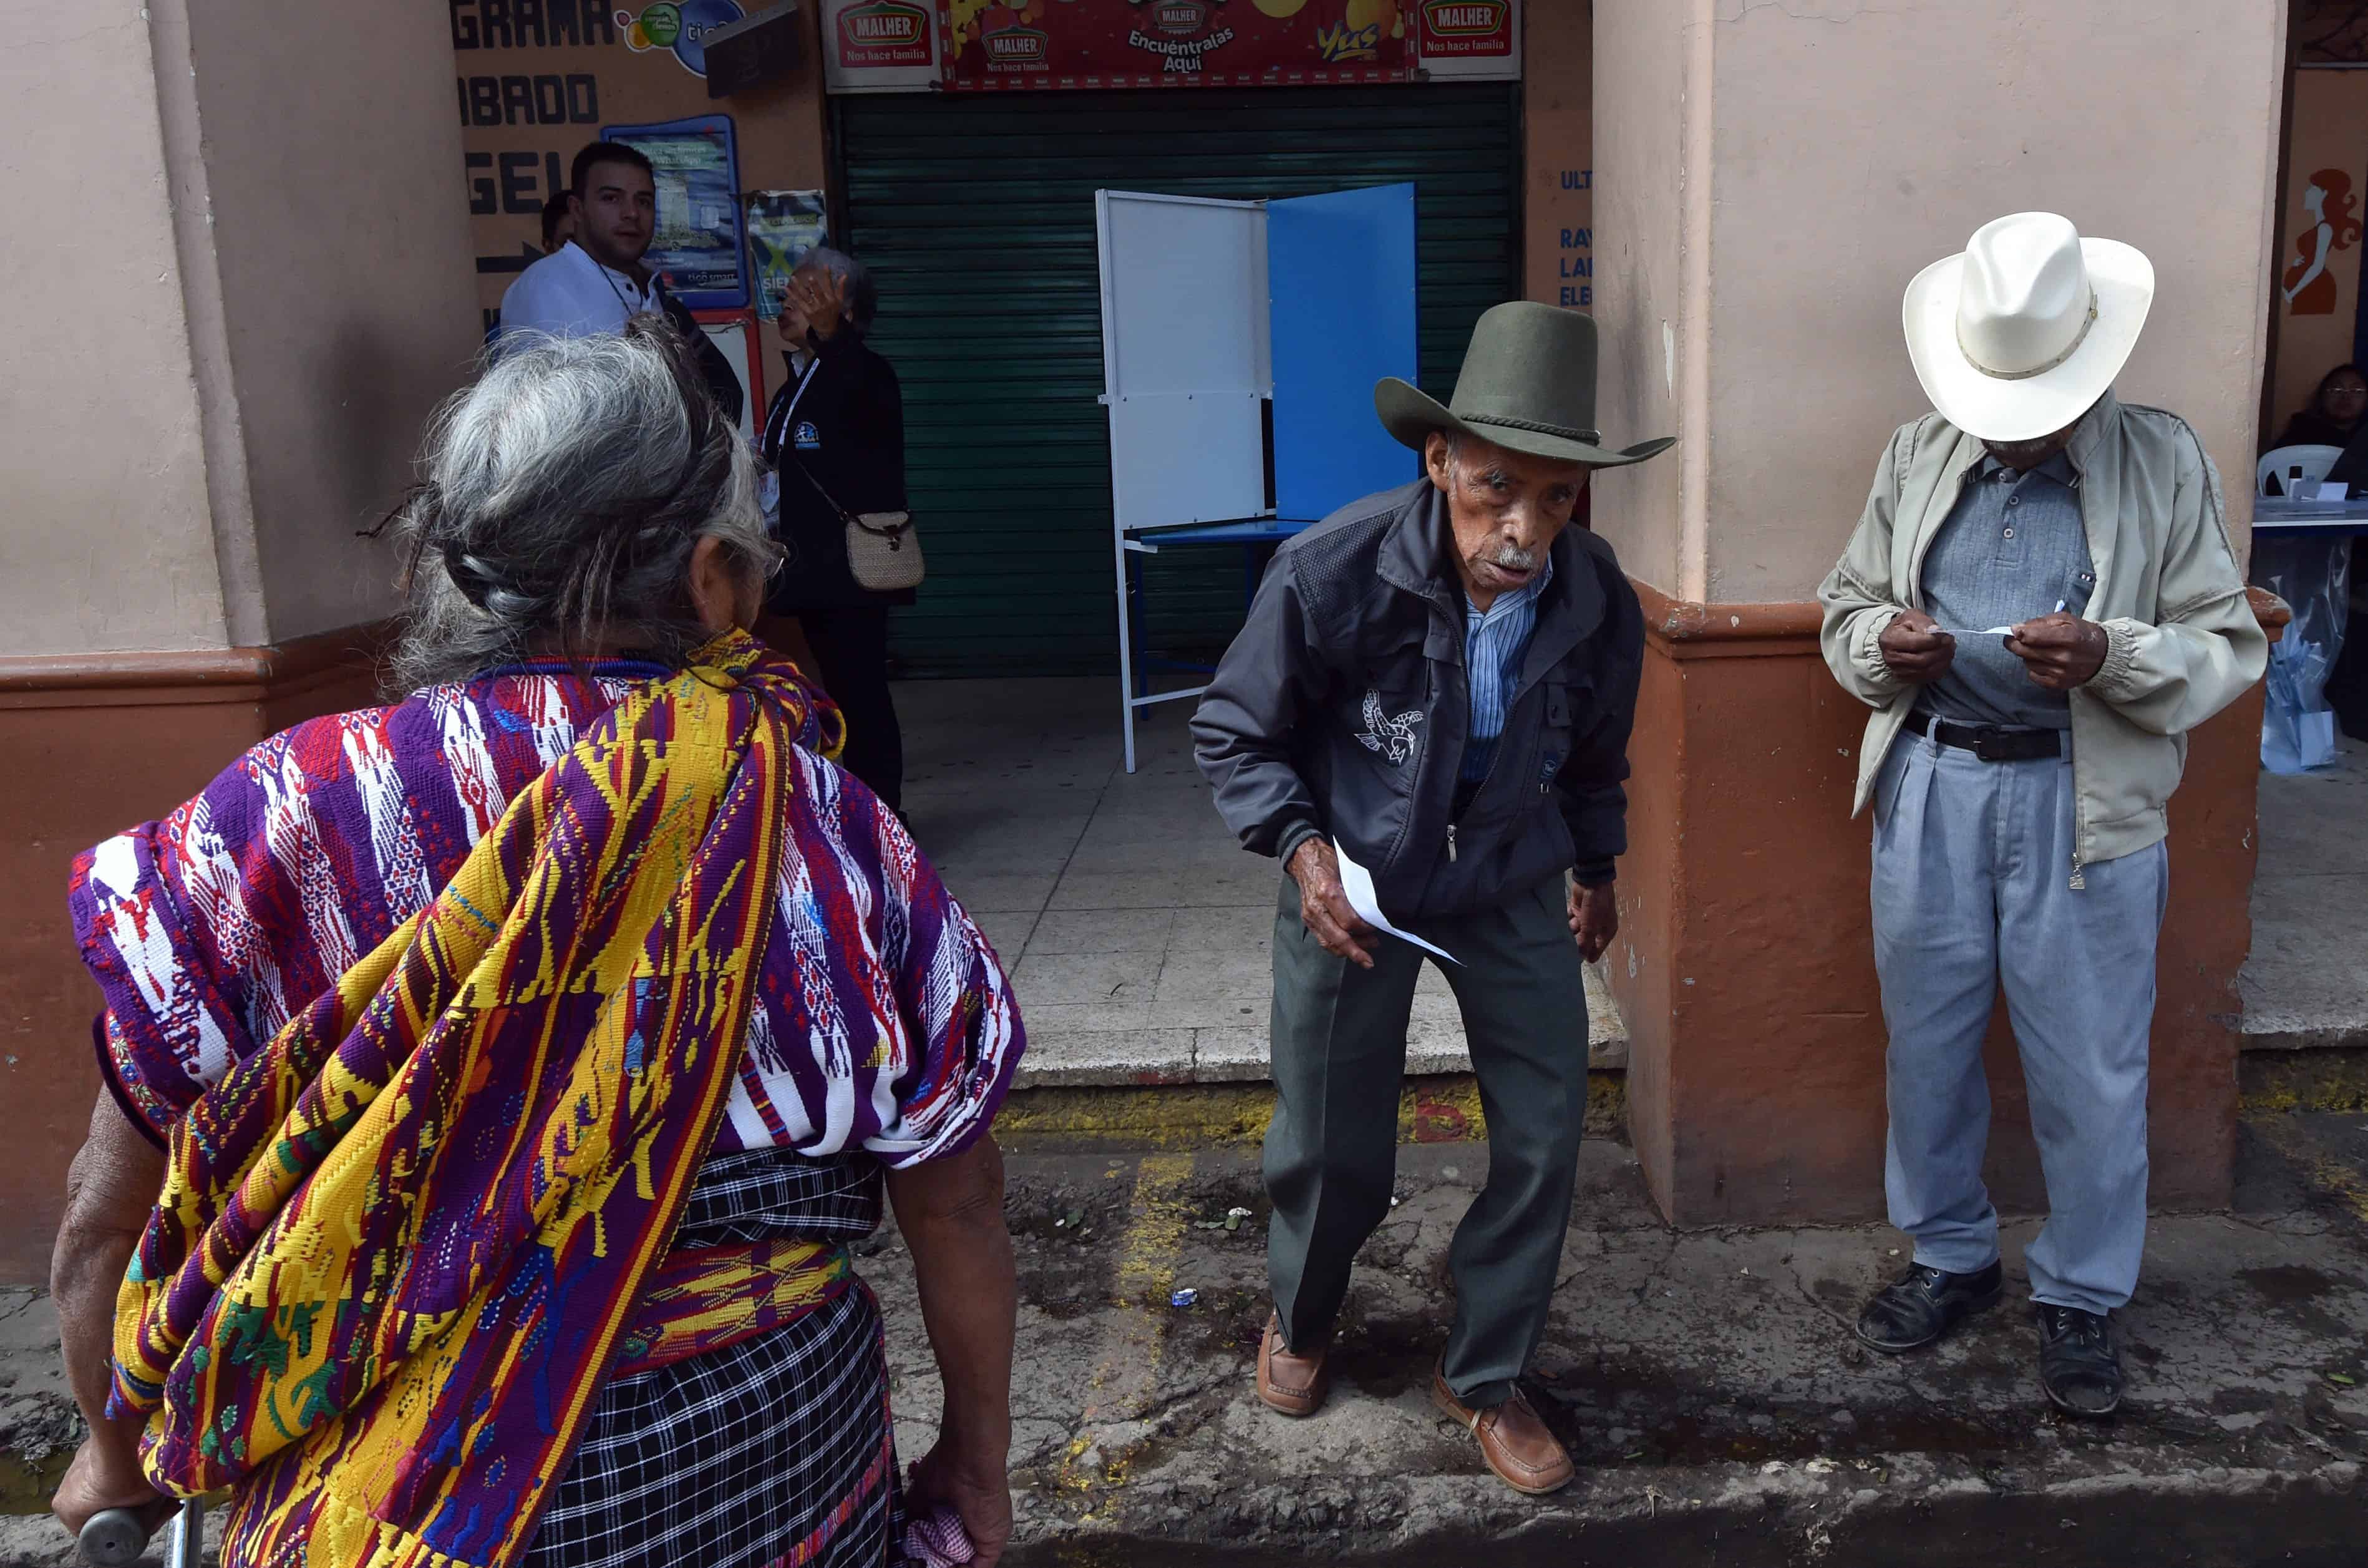 A polling station in San Juan Sacatepéquez, 40 km west of Guatemala City, during general elections on Sept. 6, 2015.